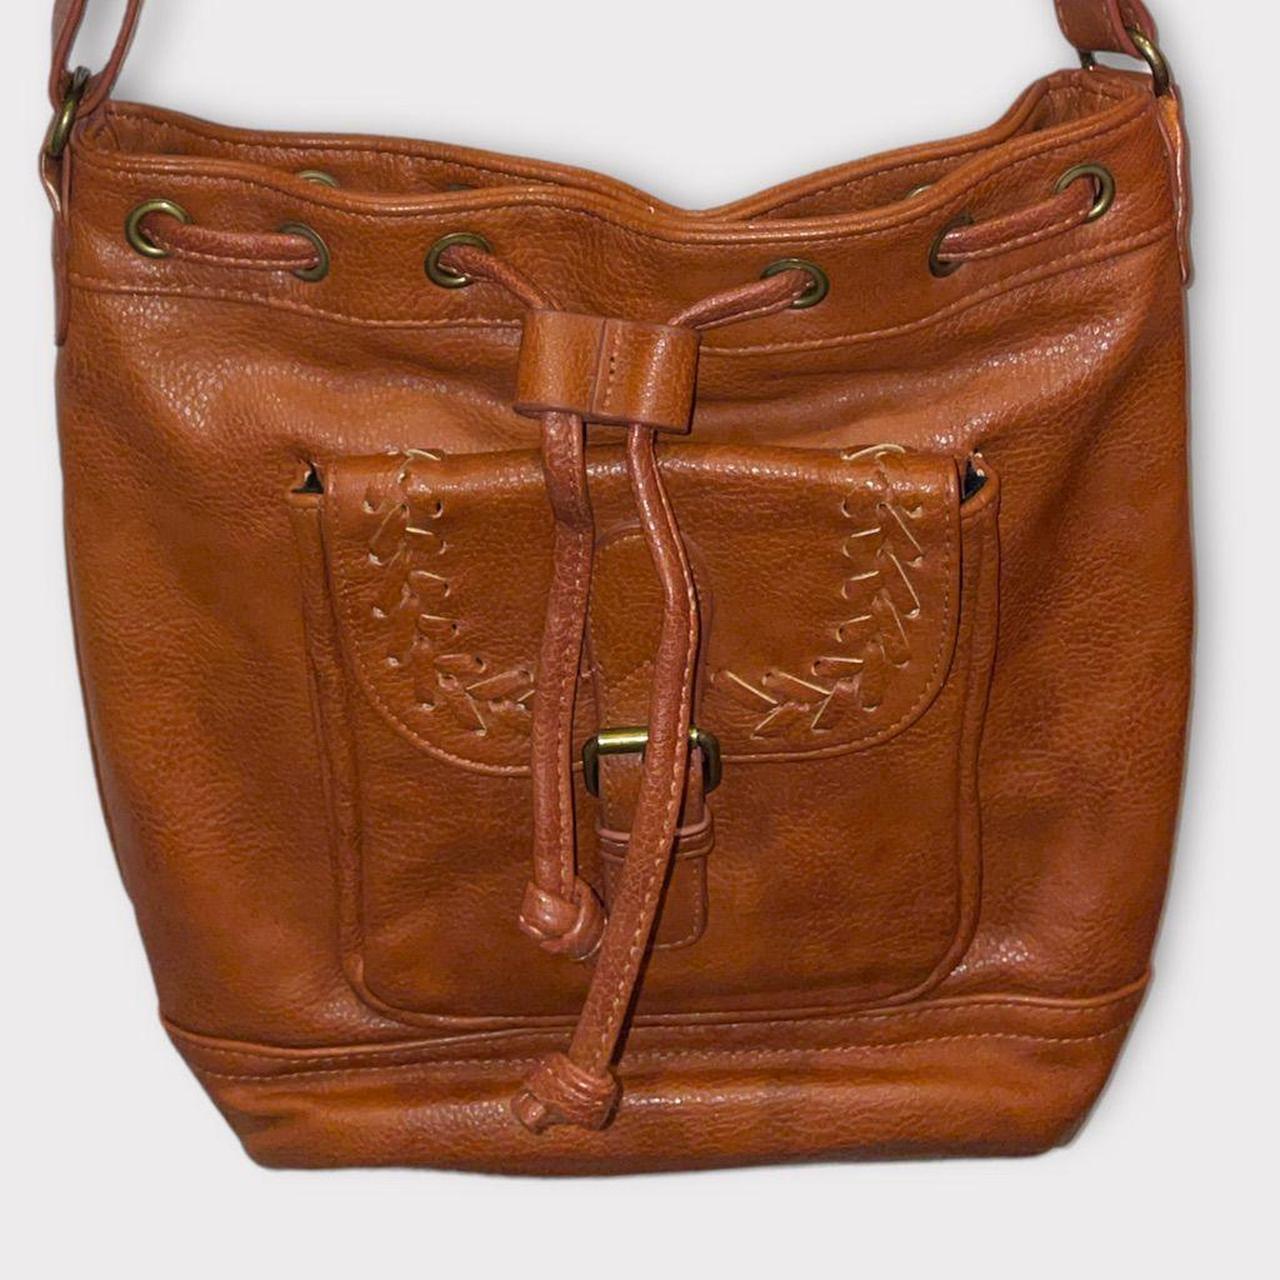 Product Image 4 - This Mossimo bucket bag is